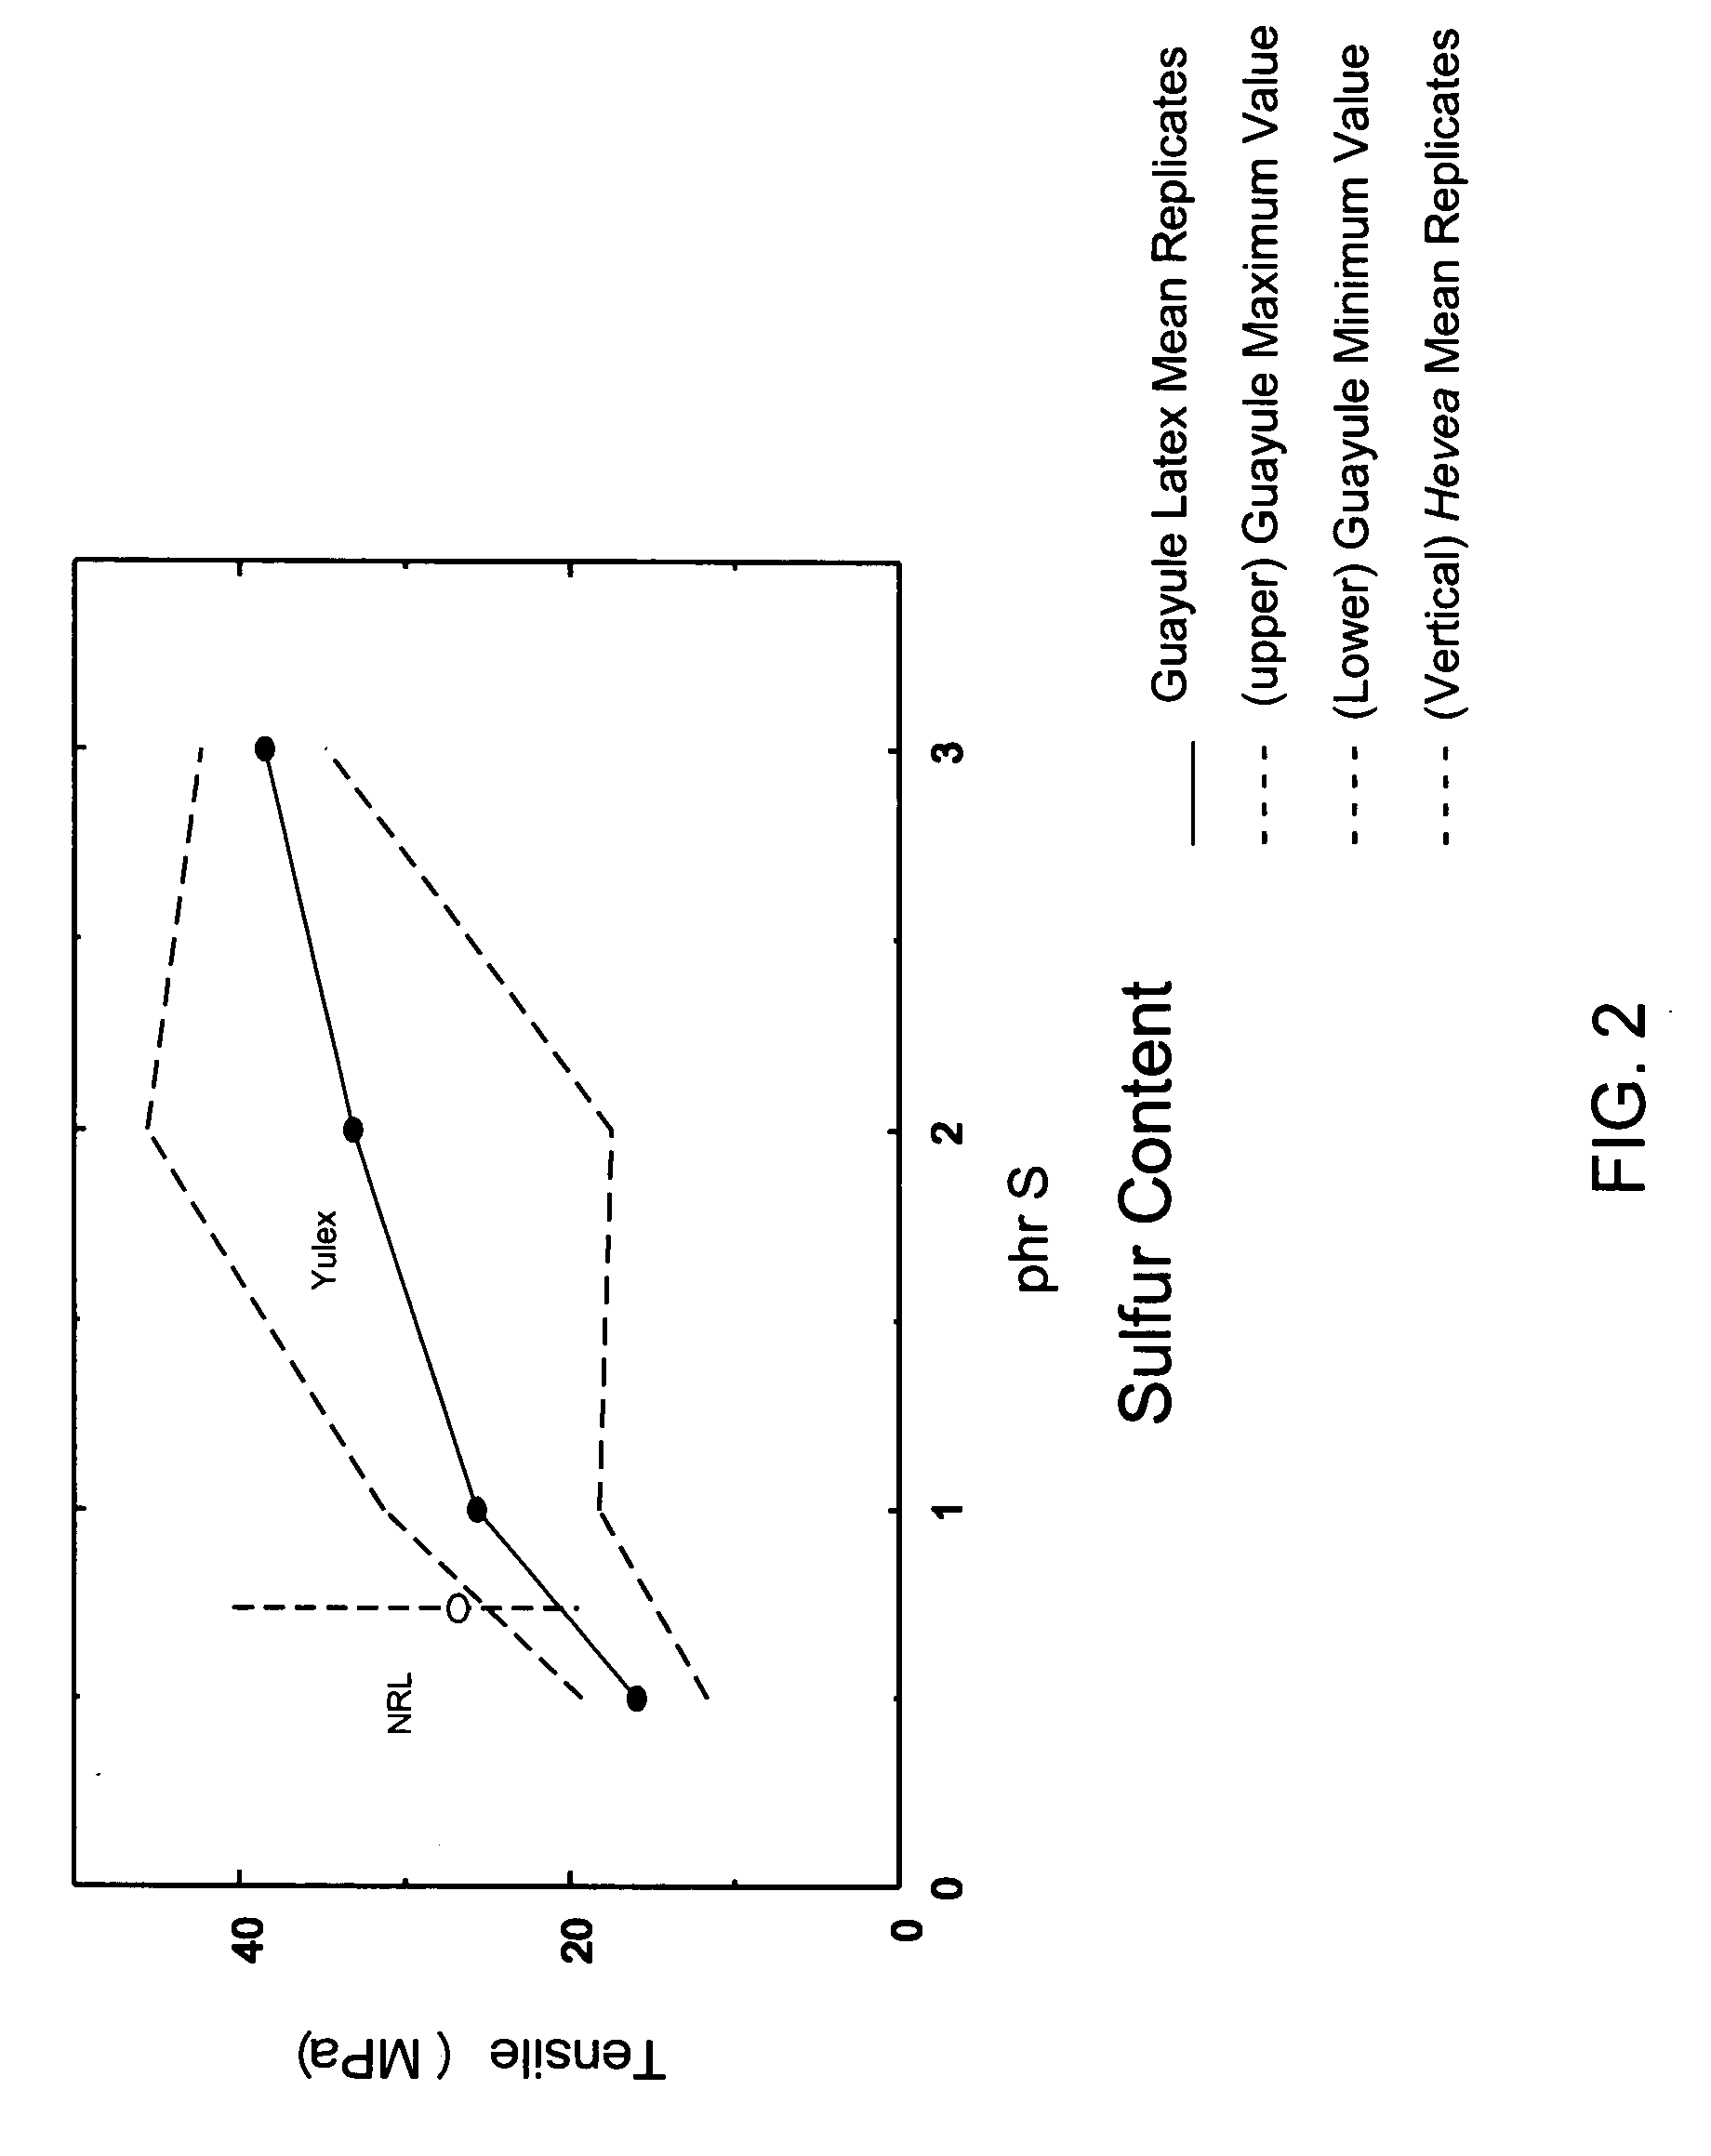 Non-synthetic low-protein rubber latex product and method of testing